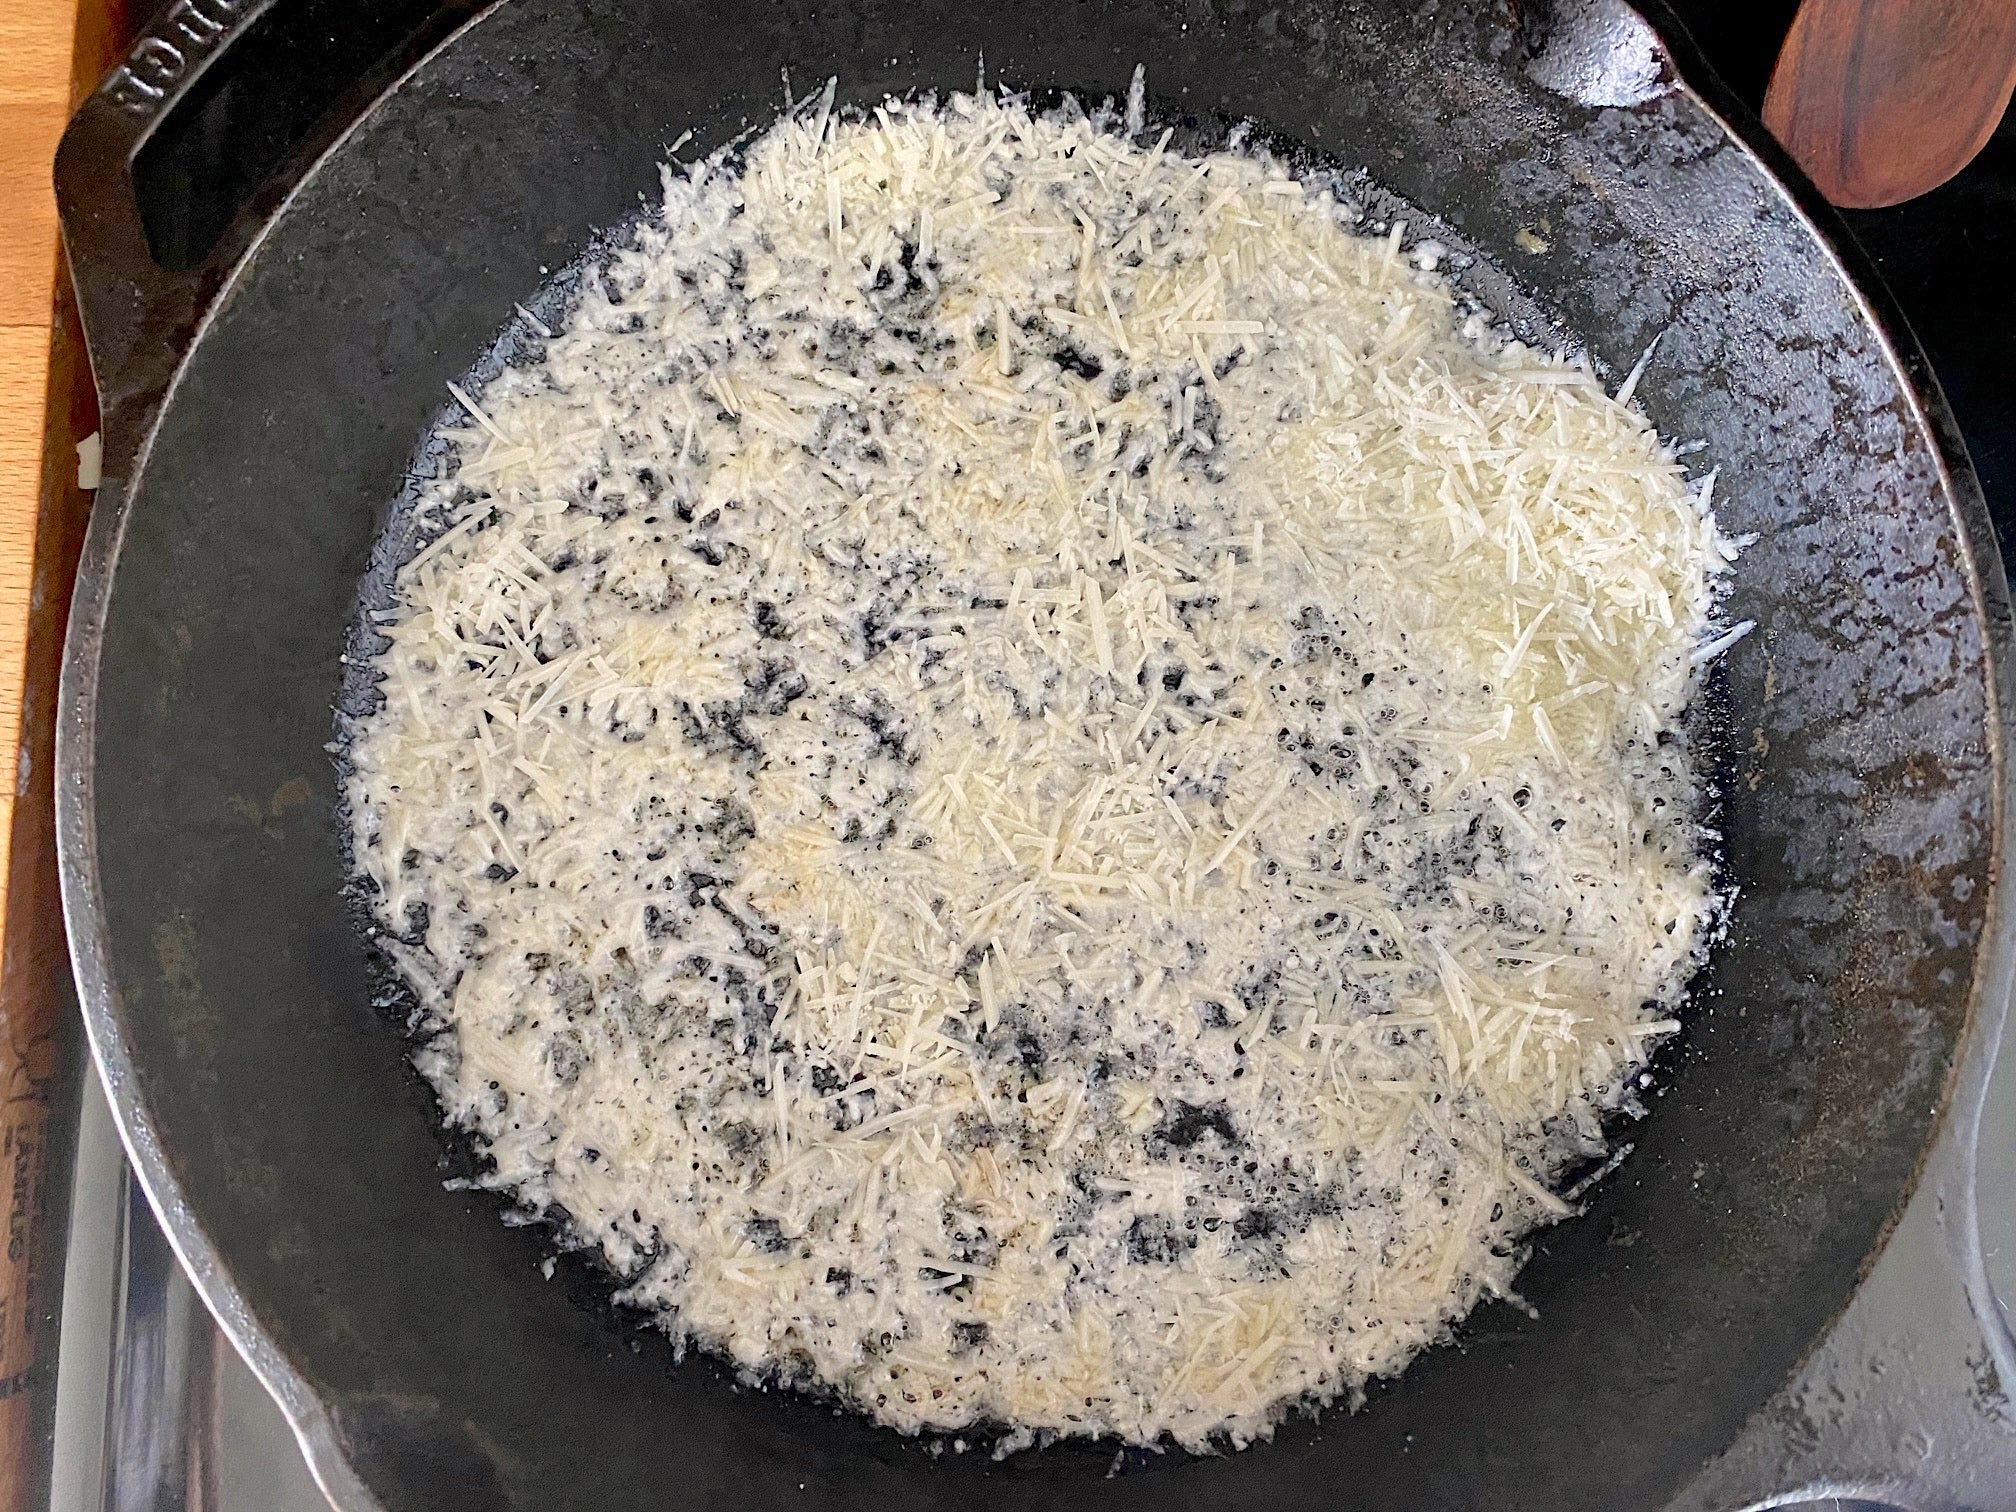 Parmesan sprinkled into the bottom of the skillet. (Photo: Allie Chanthorn Reinmann)